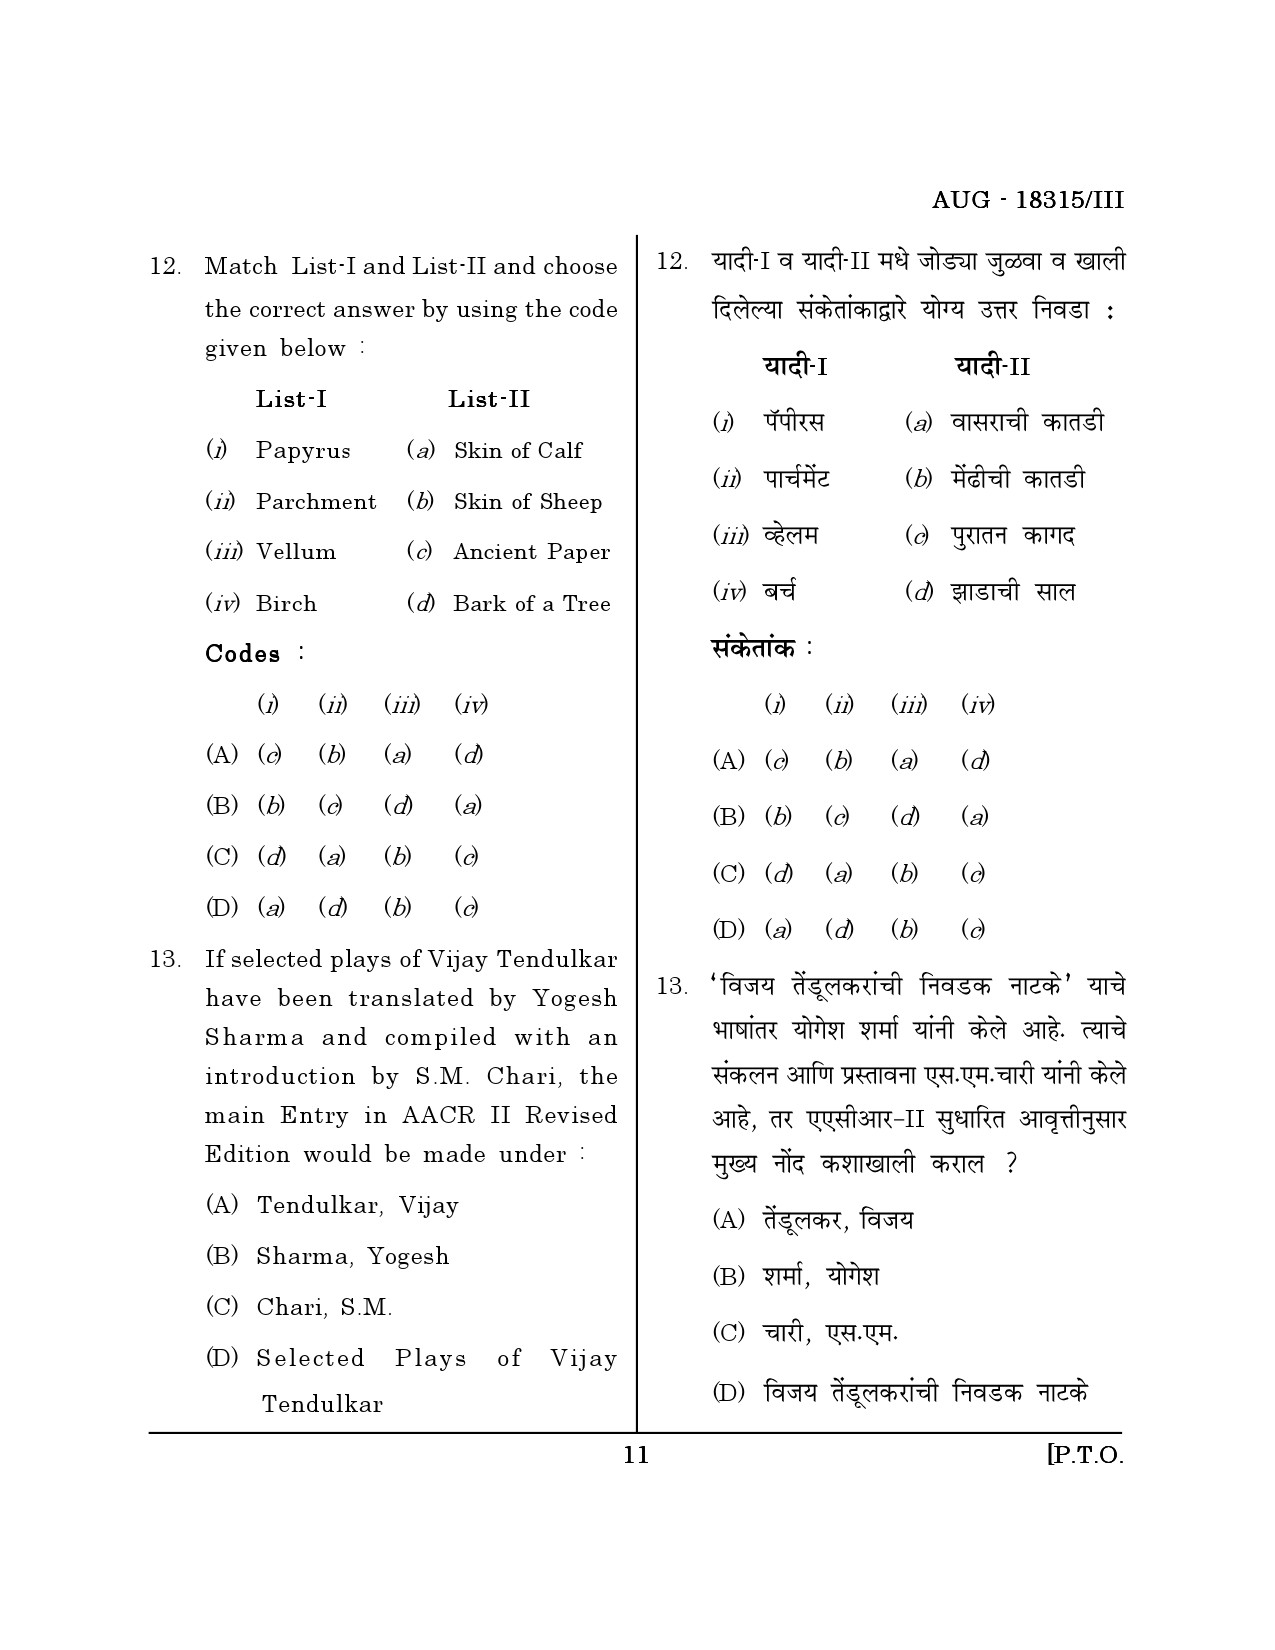 Maharashtra SET Library Information Science Question Paper III August 2015 10